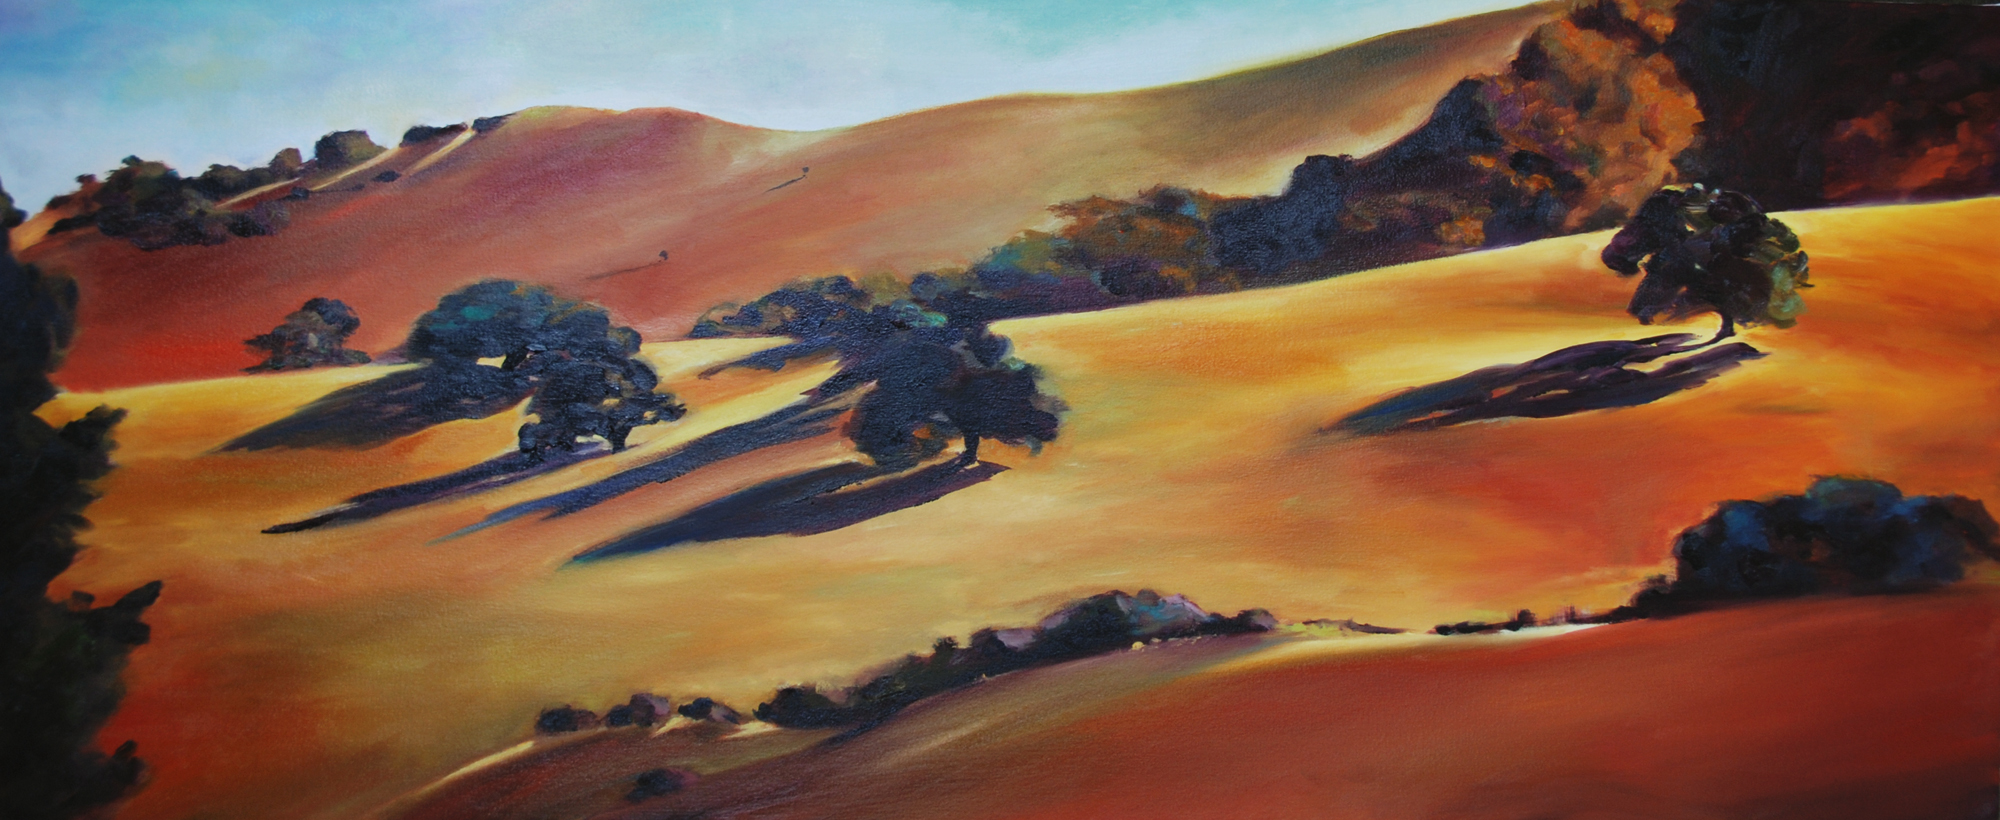 Late in July Santa Ynes Valley painting by Francene Christianson